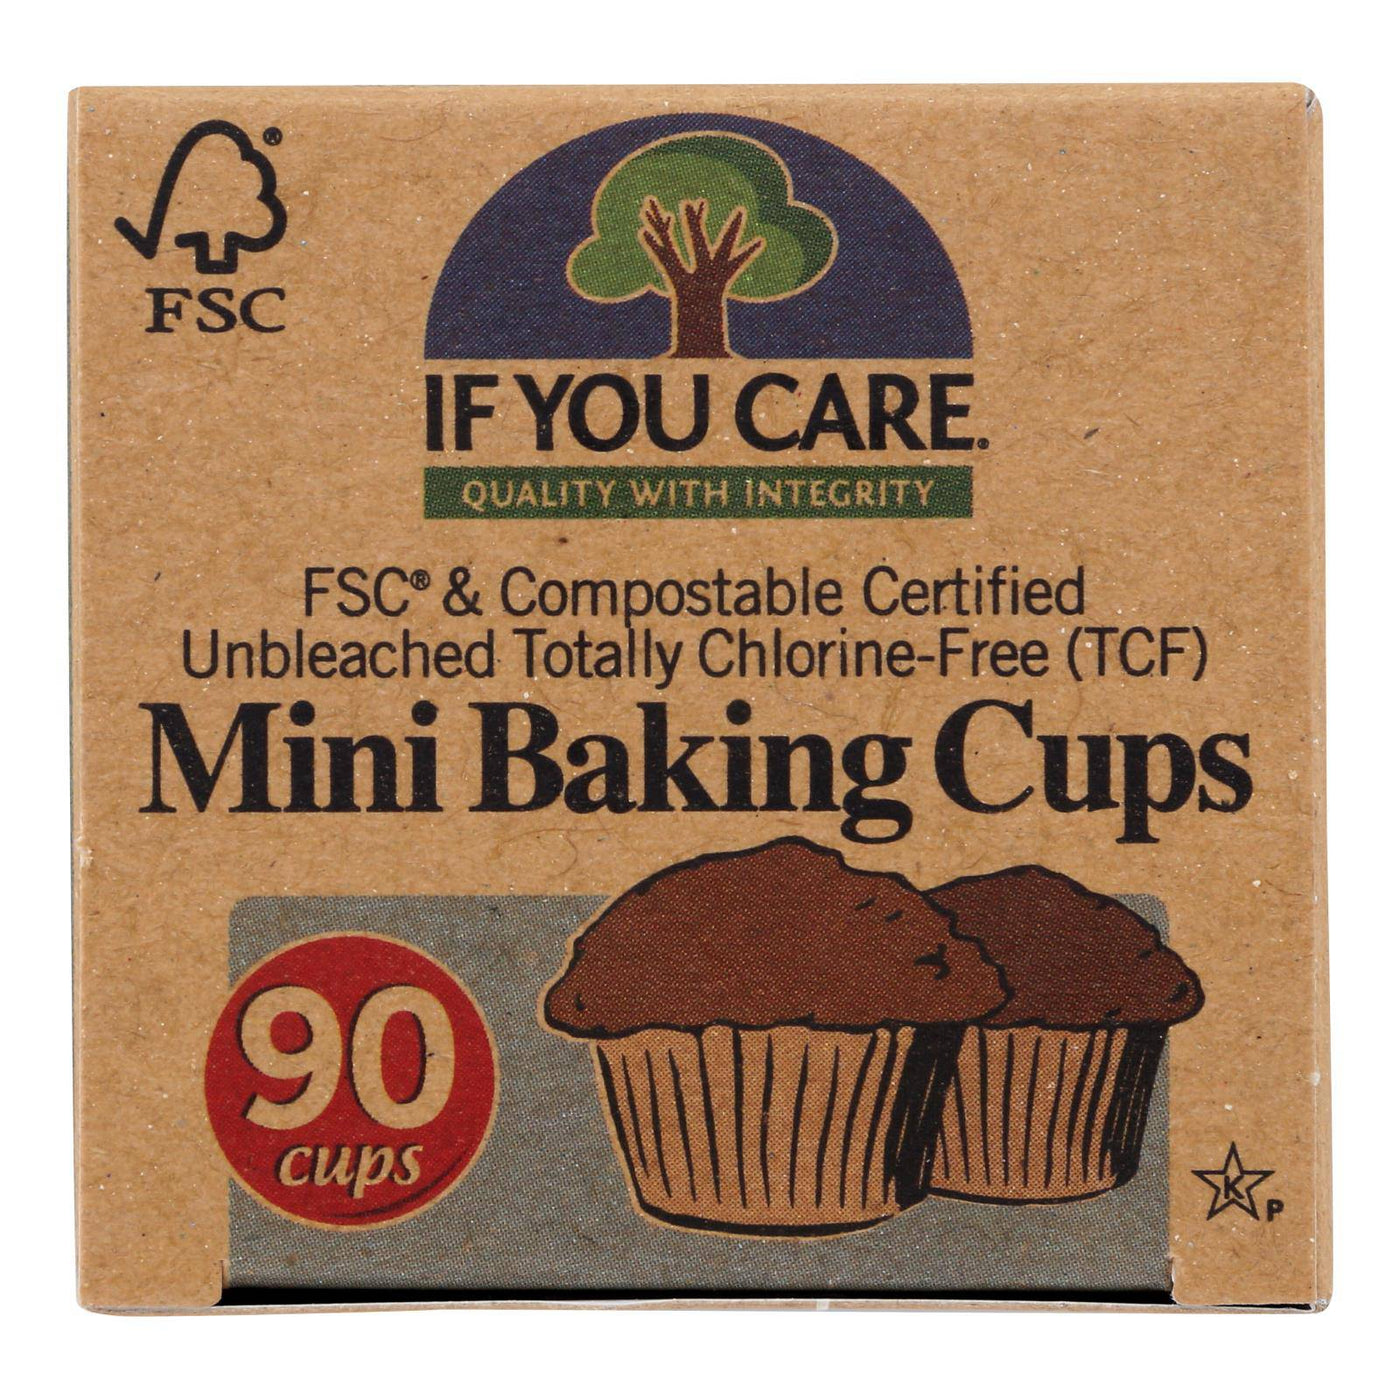 If You Care Baking Cups - Mini - Unbleached Totally Chlorine Free - 90 Count | OnlyNaturals.us